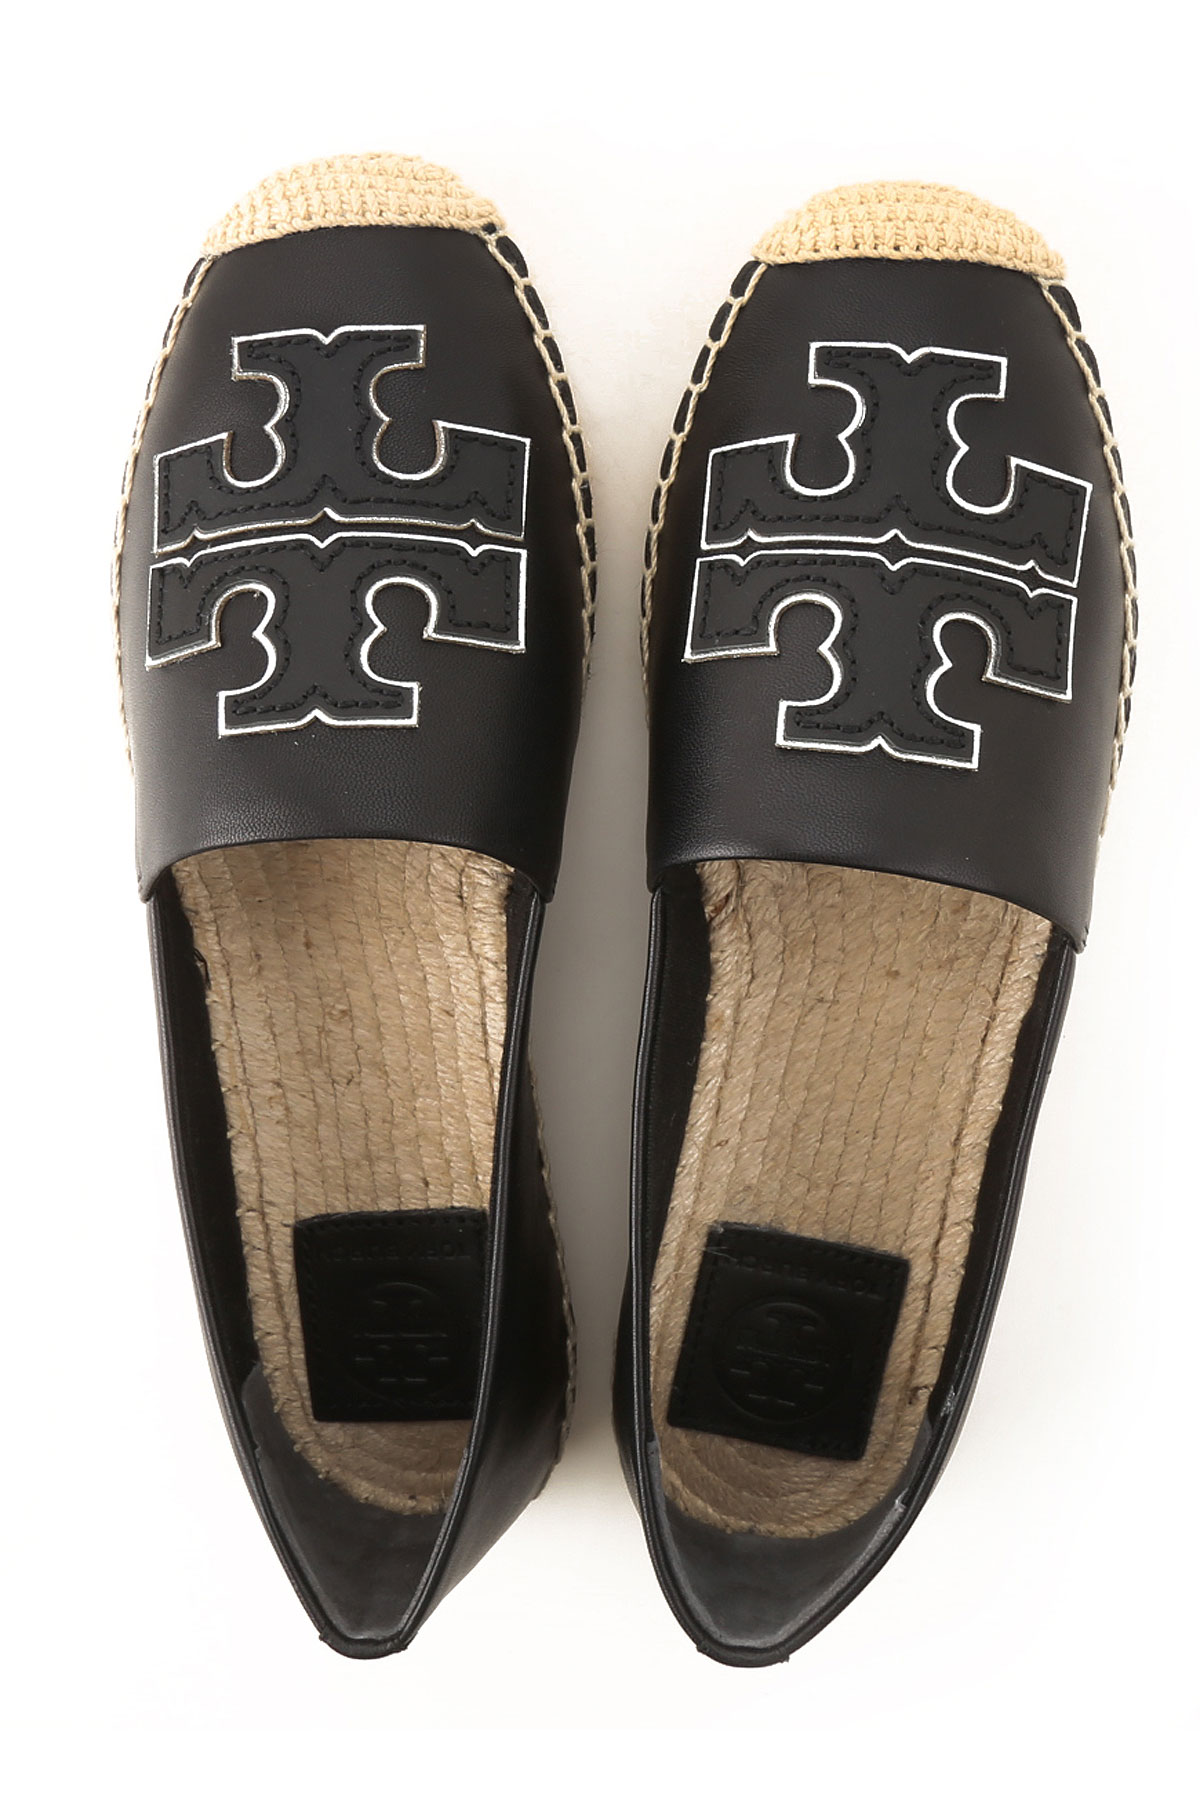 Womens Shoes Tory Burch, Style code: 52035-013-